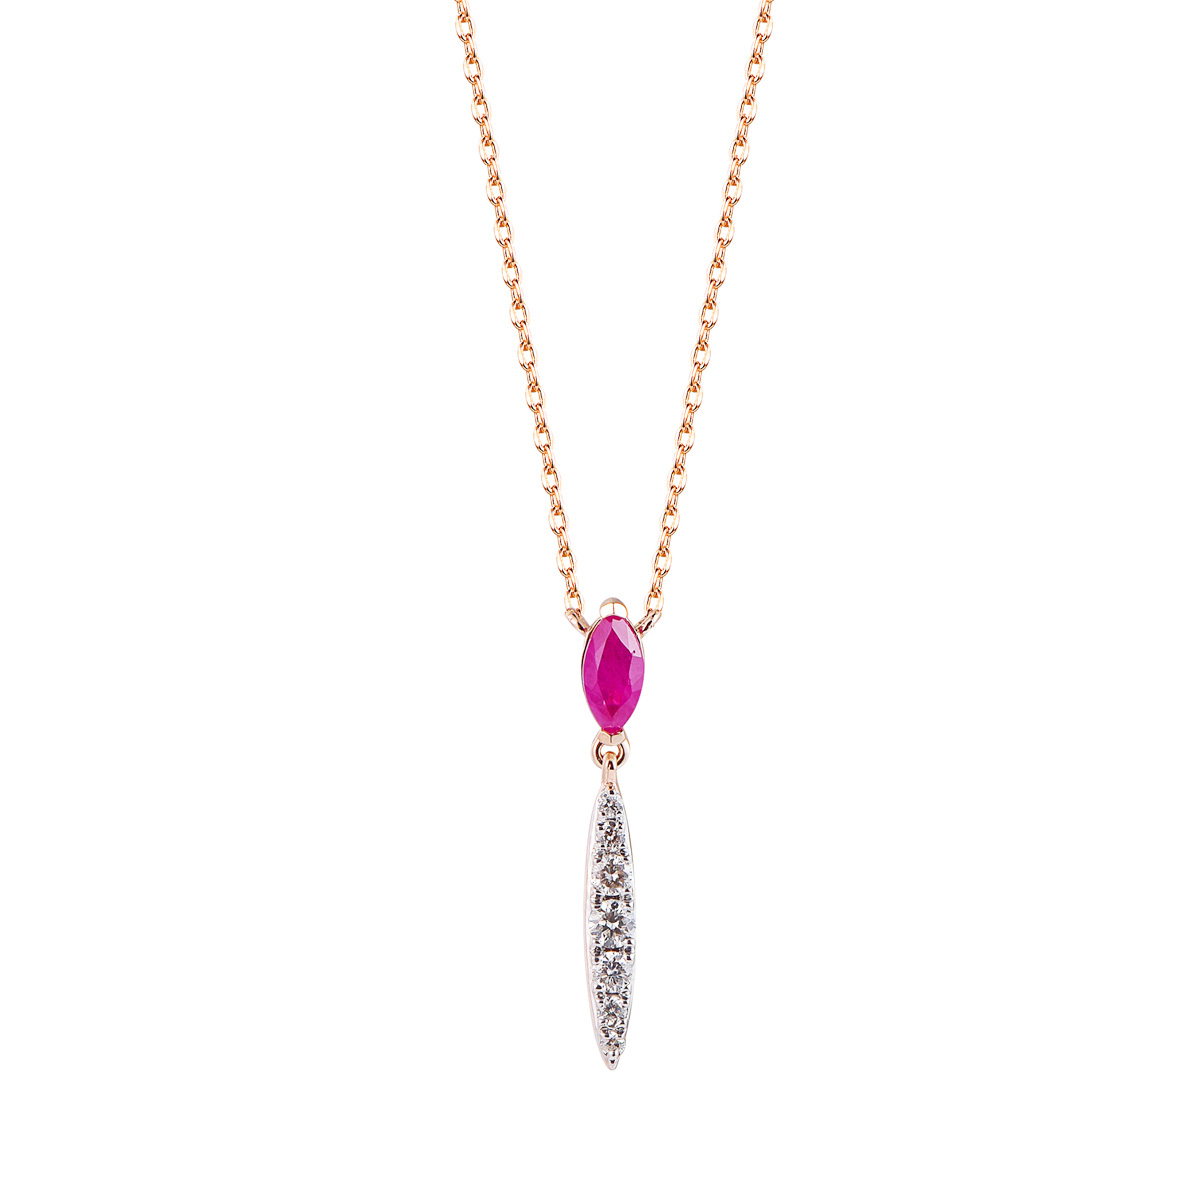 DI45080N 18K rose gold ruby necklace